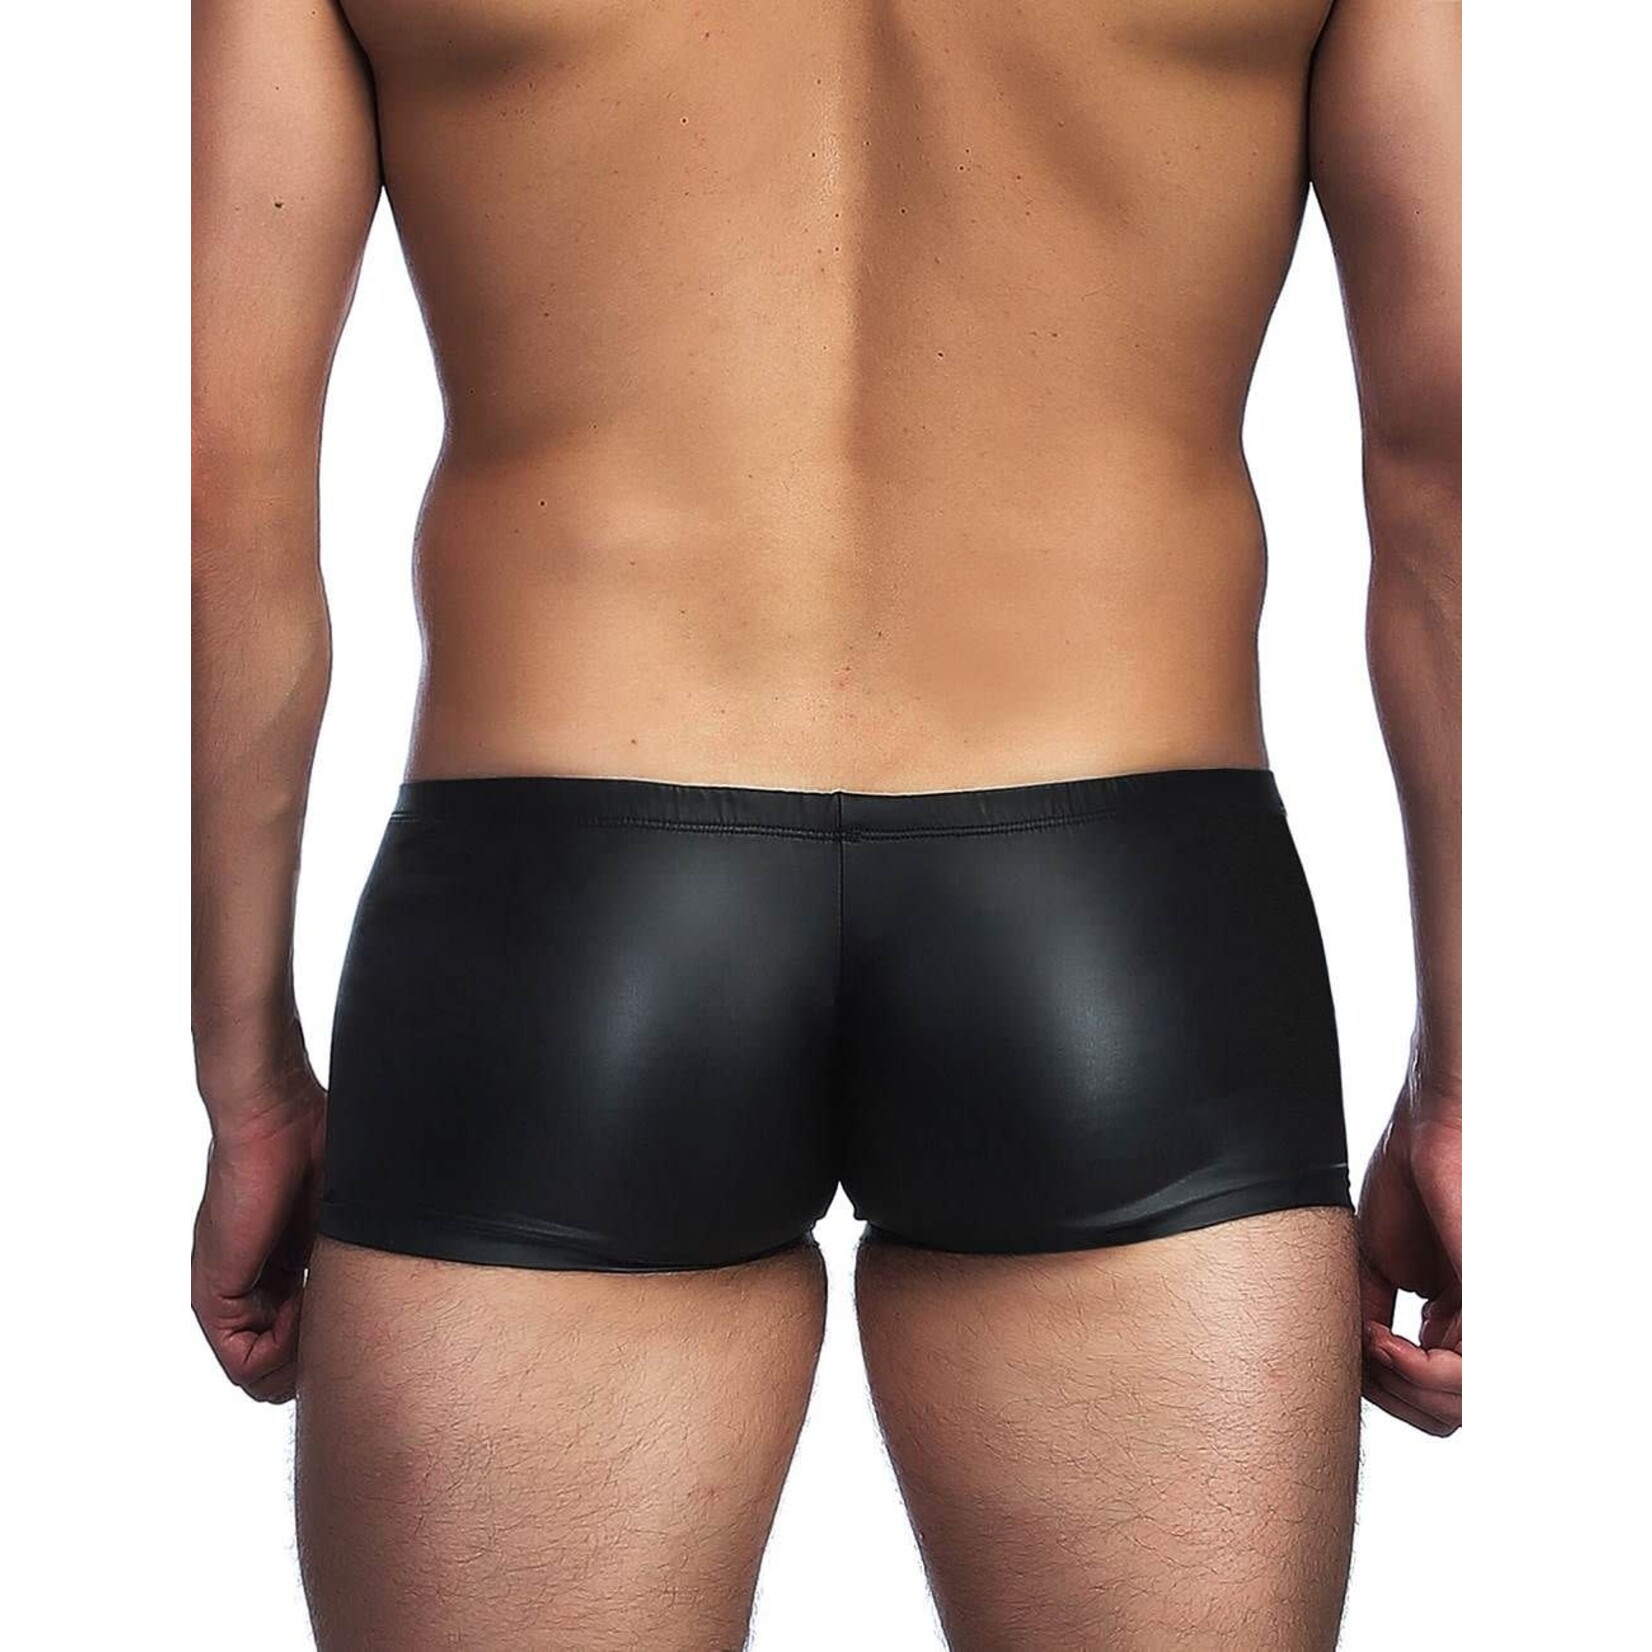 OH YEAH! -  BLACK LEATHER SEXY PANTY FOR MAN XL